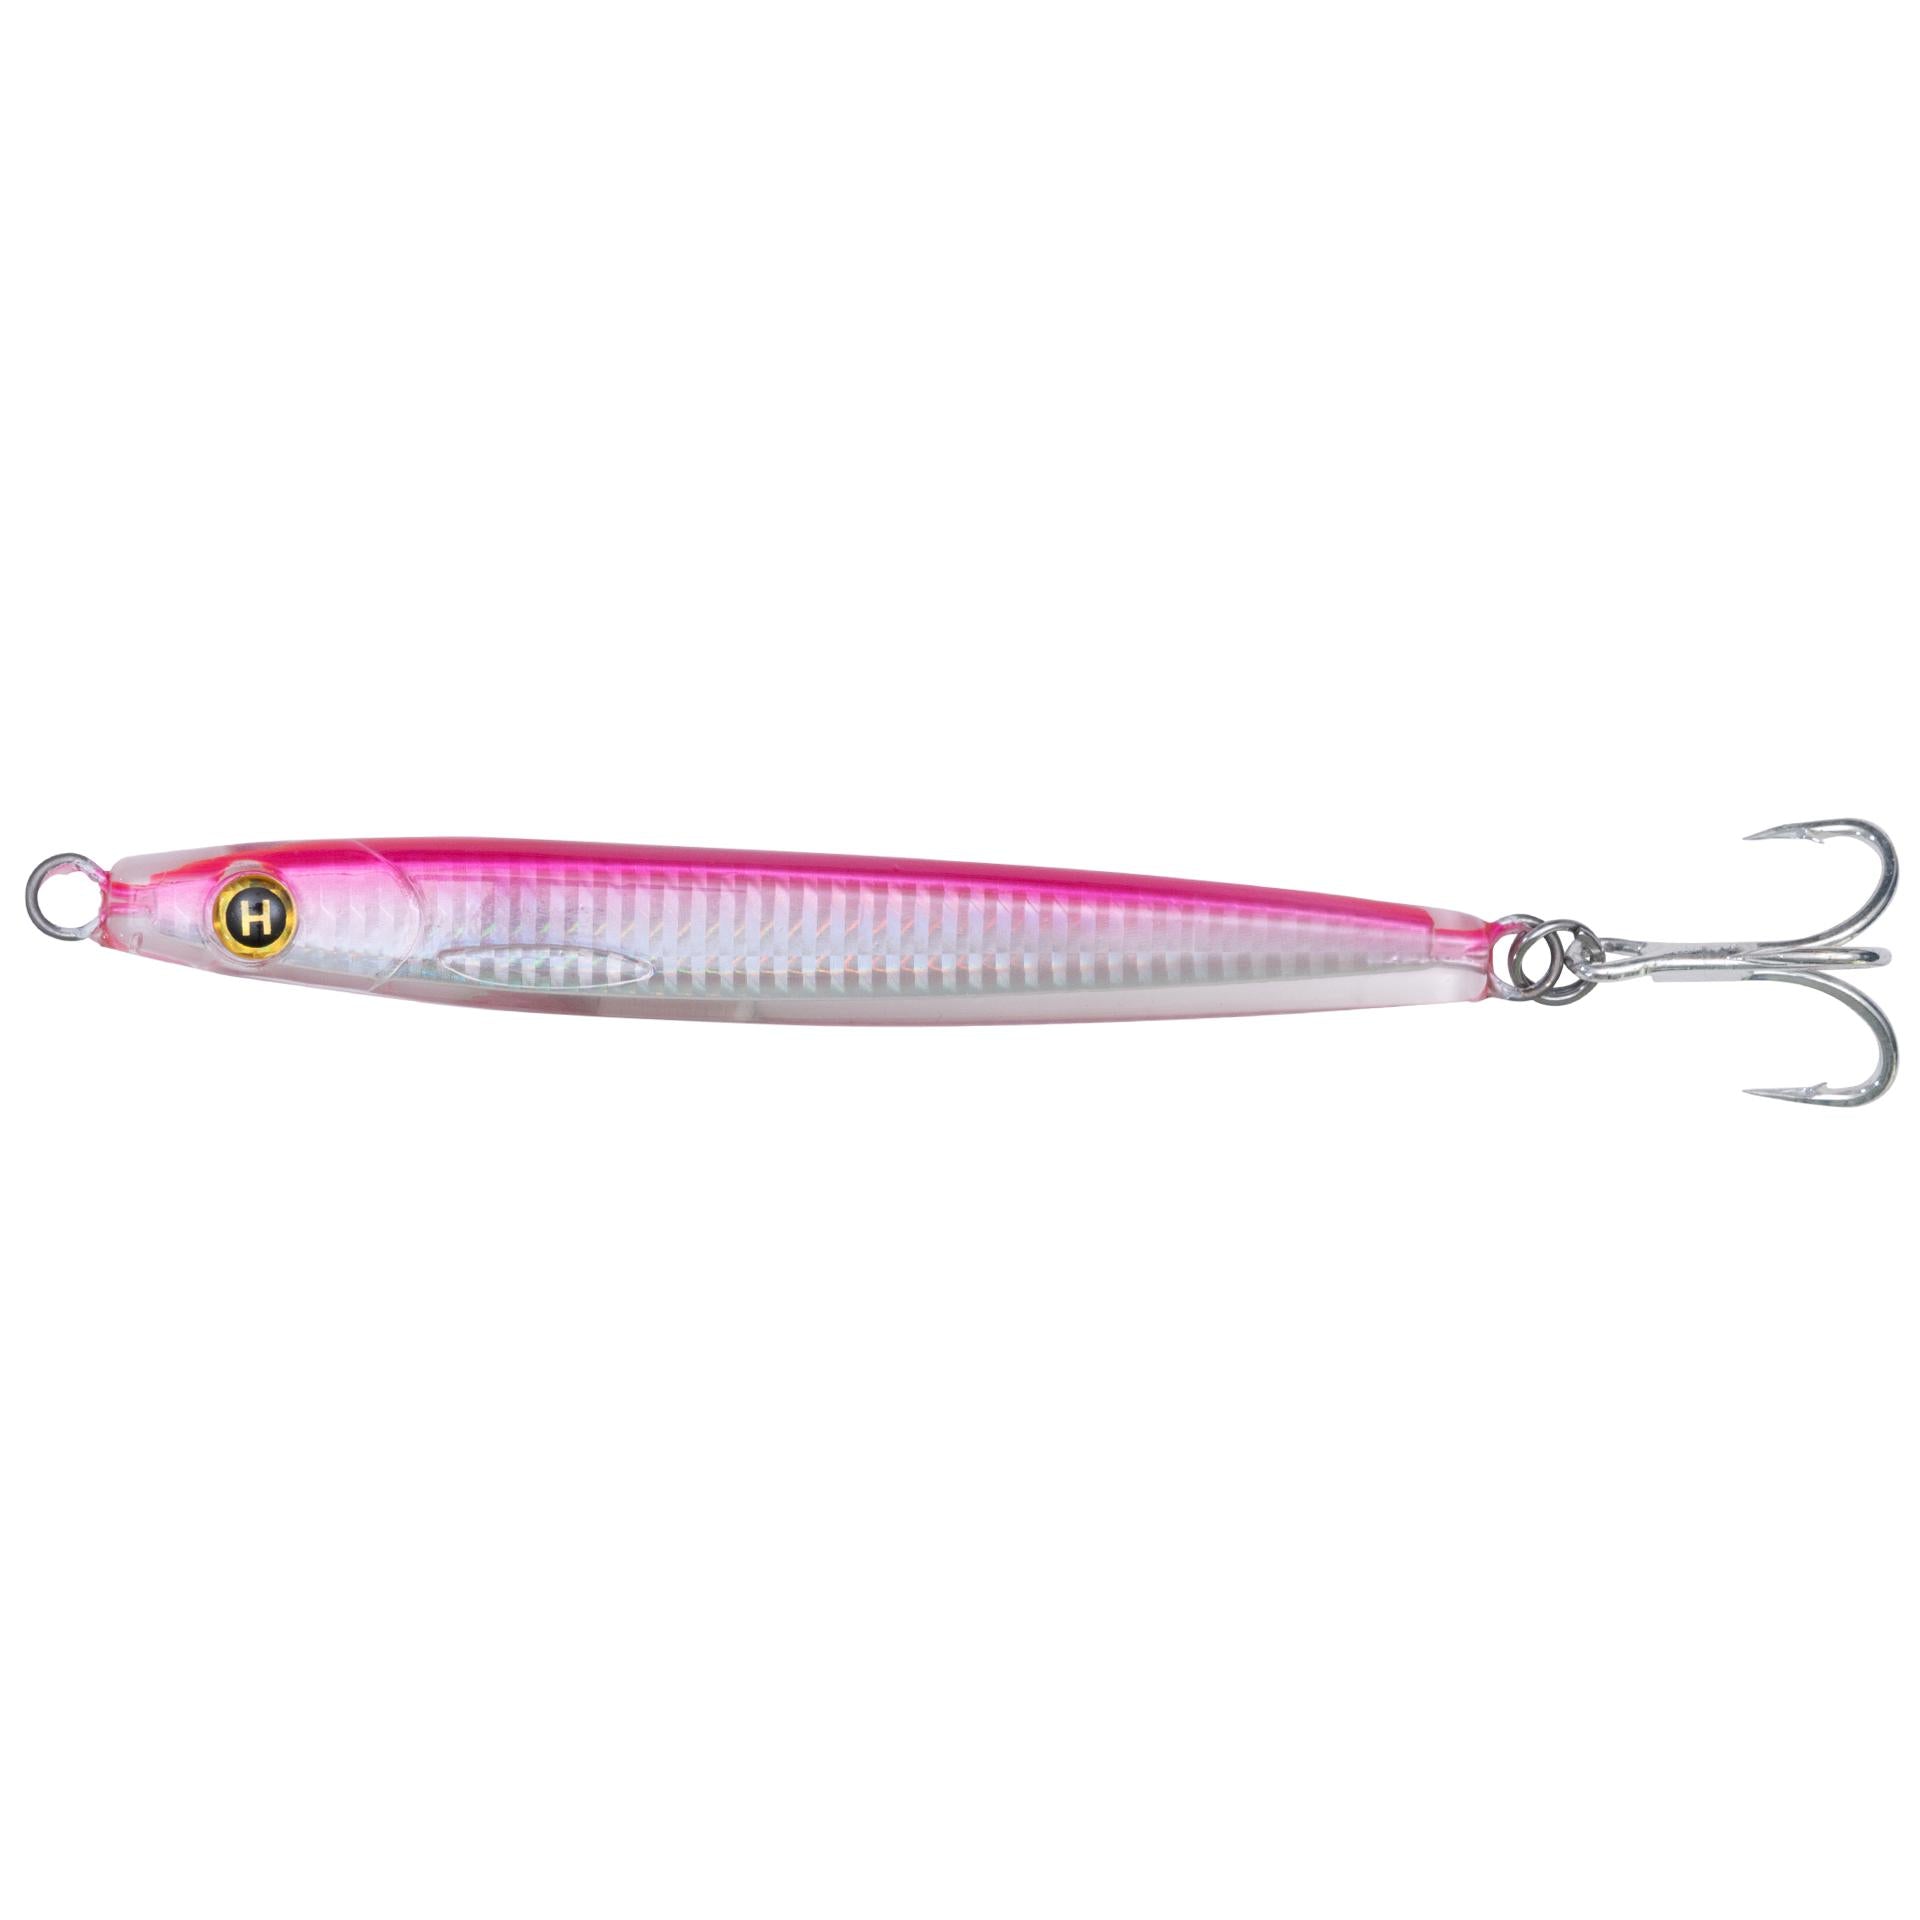 Epoxy Resin Fishing Jig Lure (2 inch / 0.5 Ounce) - Great for Striped Bass,  Tuna and Other Game Fish (Bunker, 0.5 Ounce)